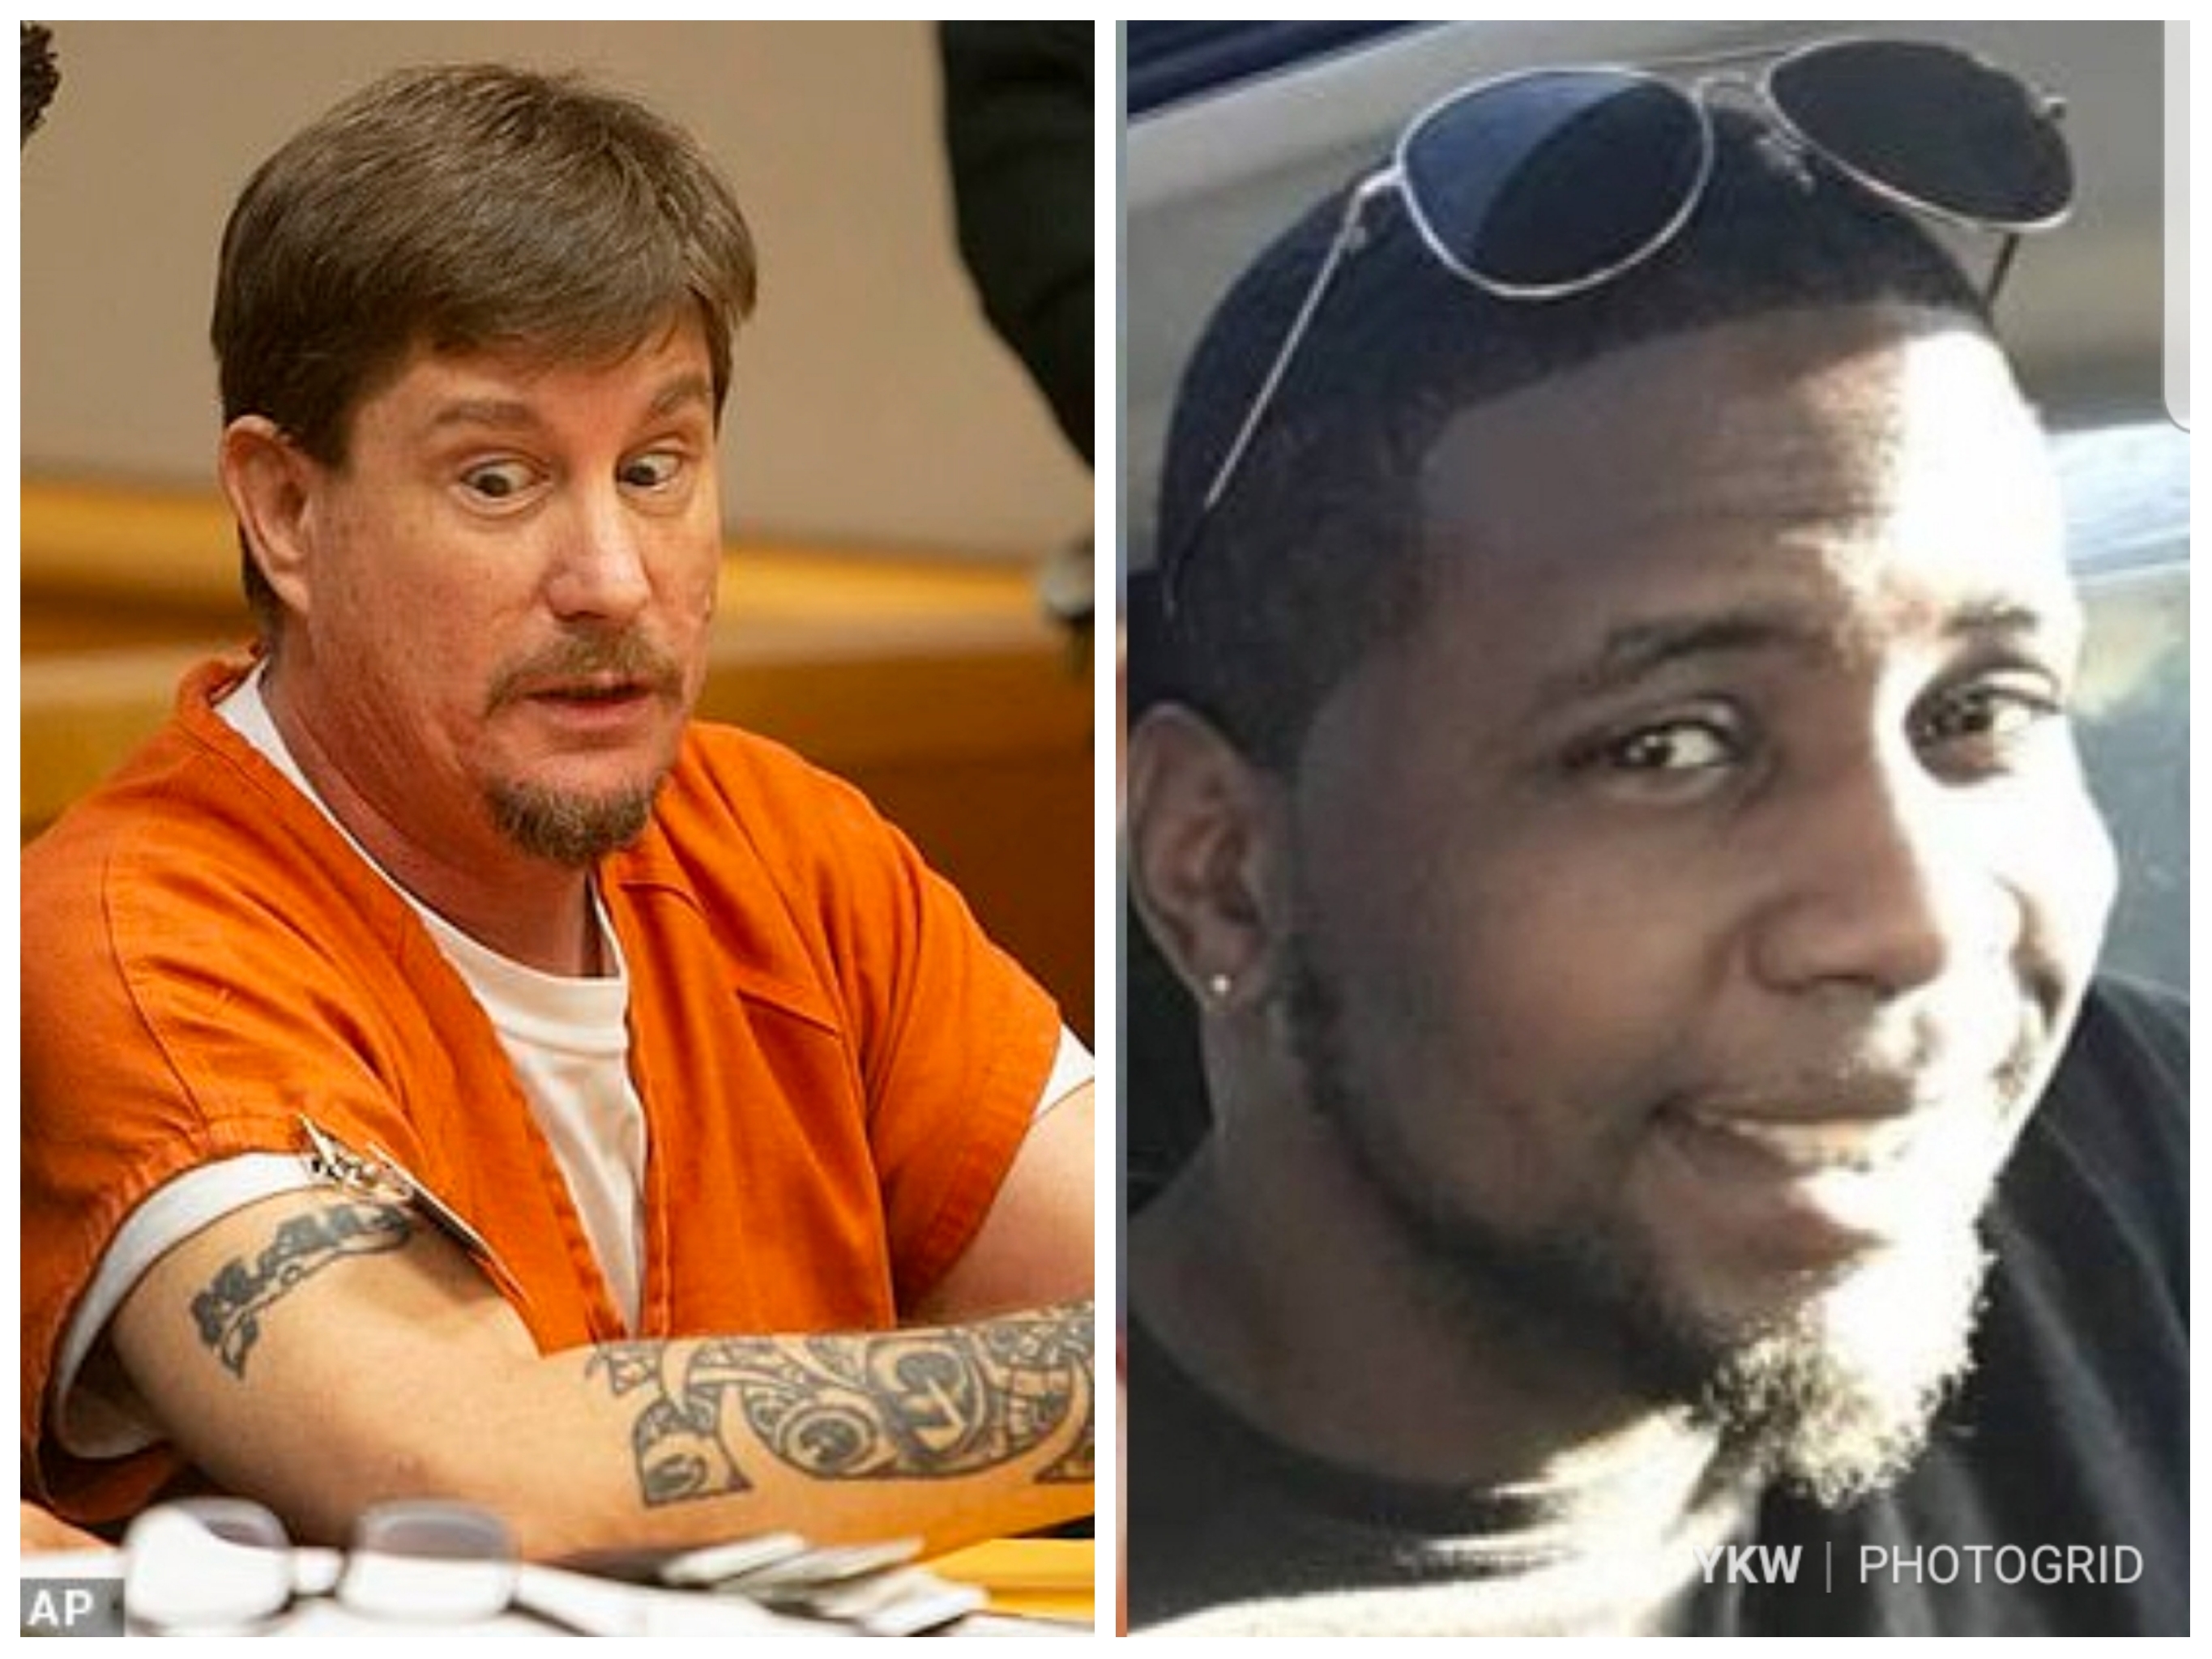 Florida Man Gets 20 Years In Prison For Killing Unarmed Black Man Over Parking Space